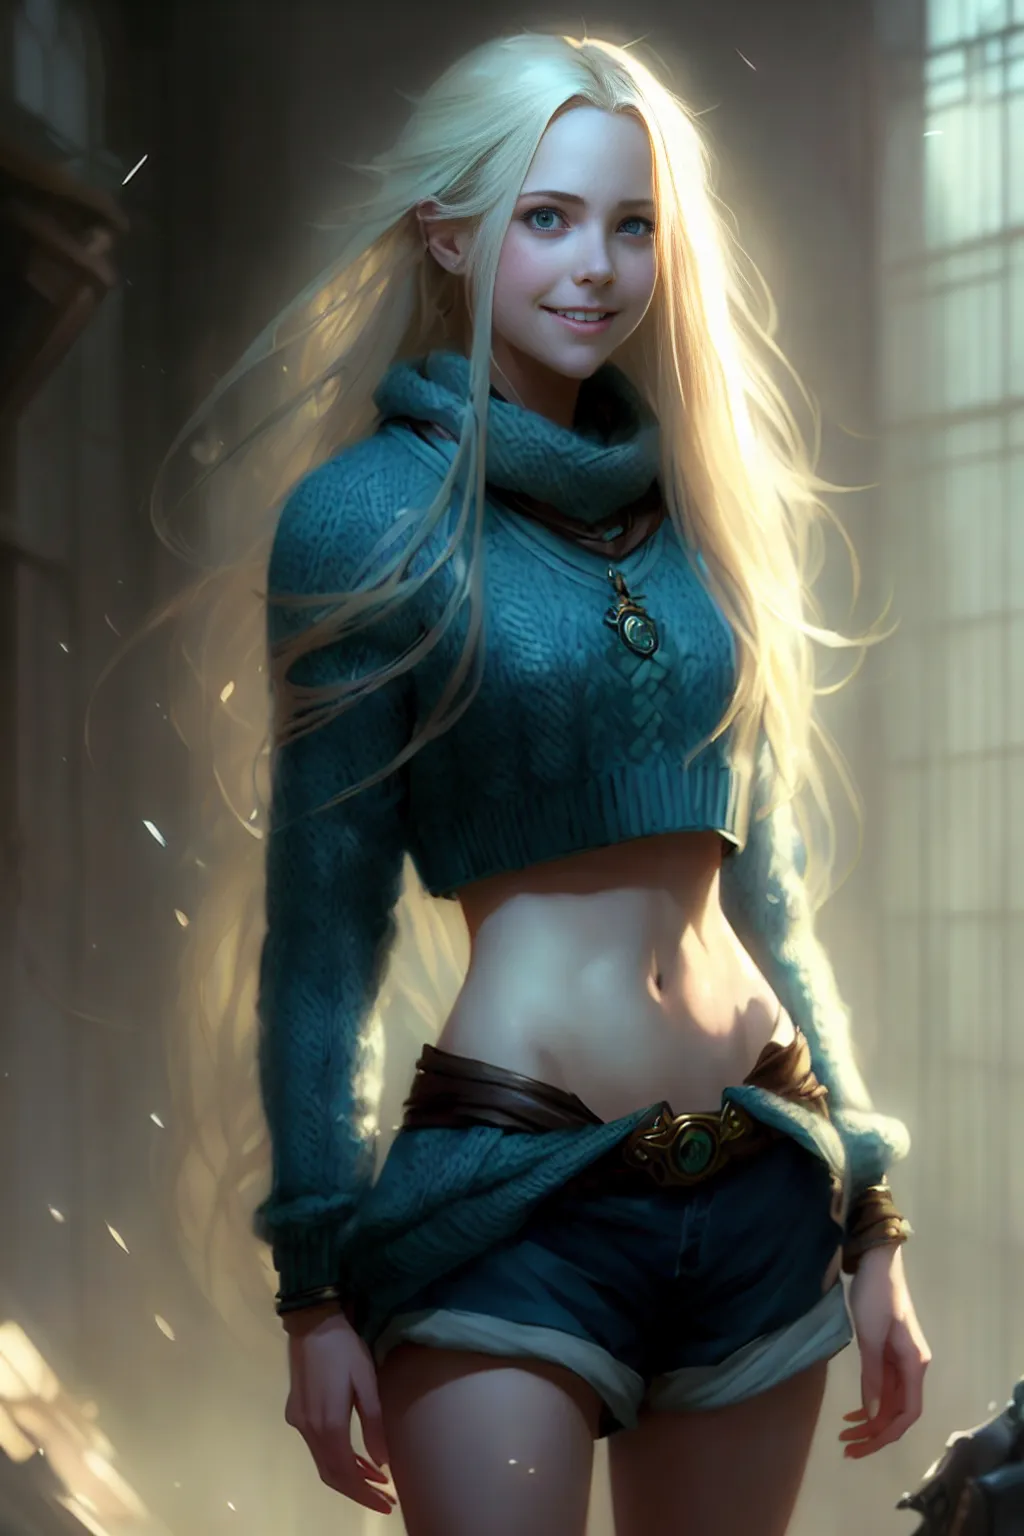 1 girl, Young woman with long blonde hair and aqua eyes wearing a grey sweater, showing belly, low rise, blue shorts, standing, front view, smiling, highly detailed 